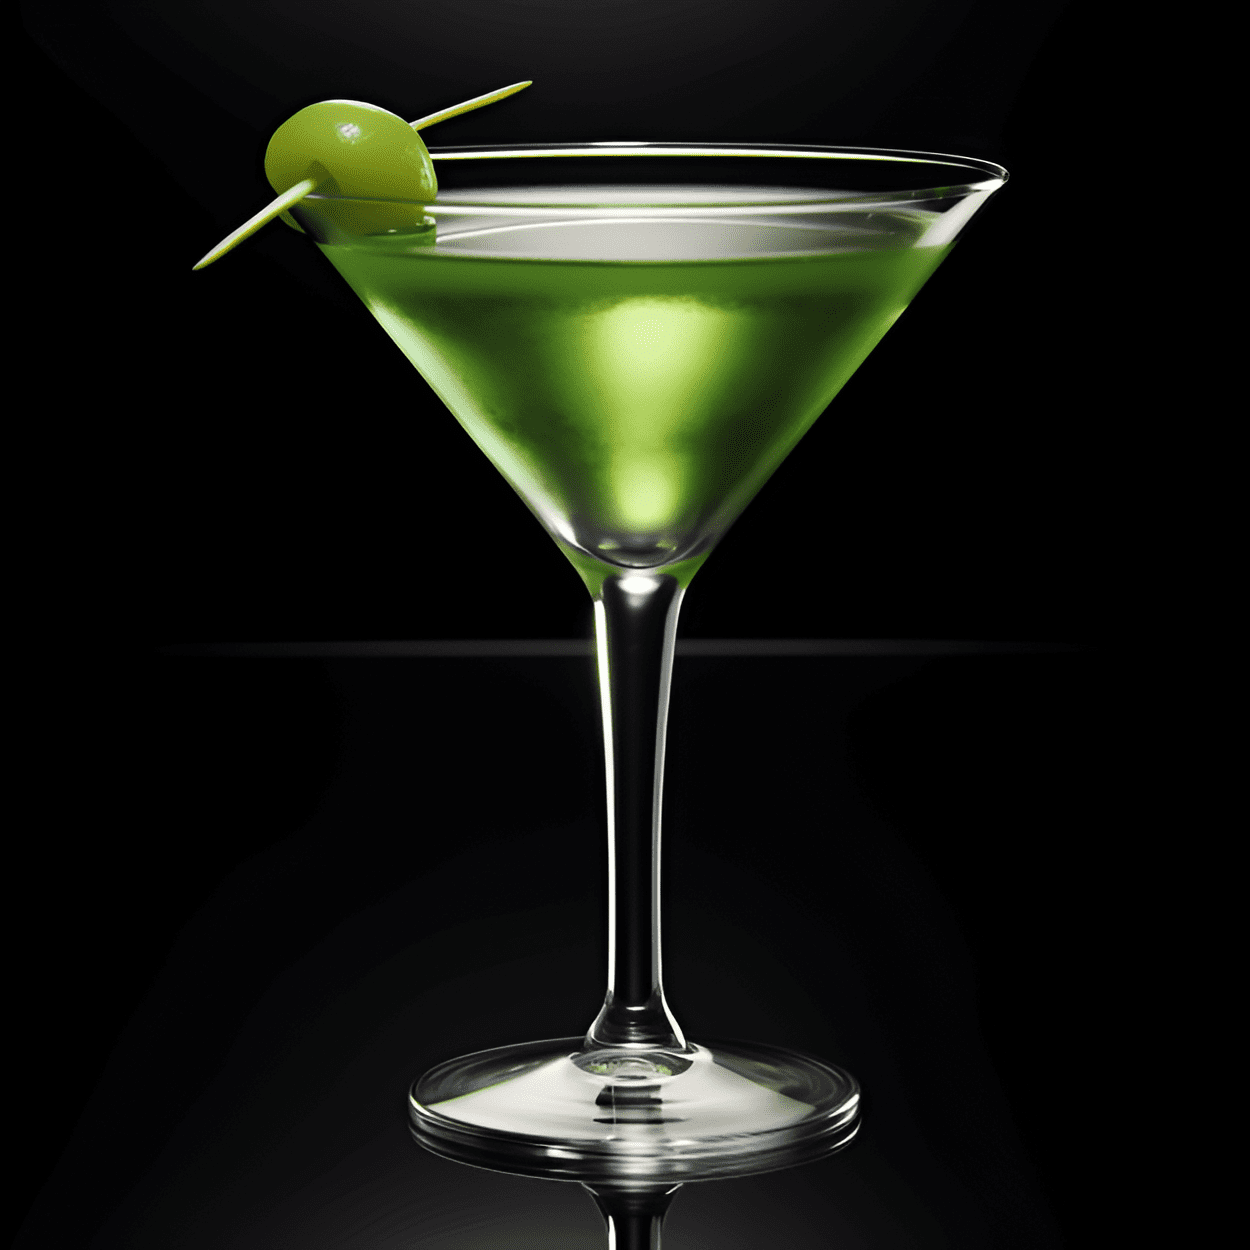 Midori Sour Cocktail Recipe - The Midori cocktail has a sweet and fruity taste, with a hint of melon flavor. It is light and refreshing, making it perfect for warm weather or as a palate cleanser.